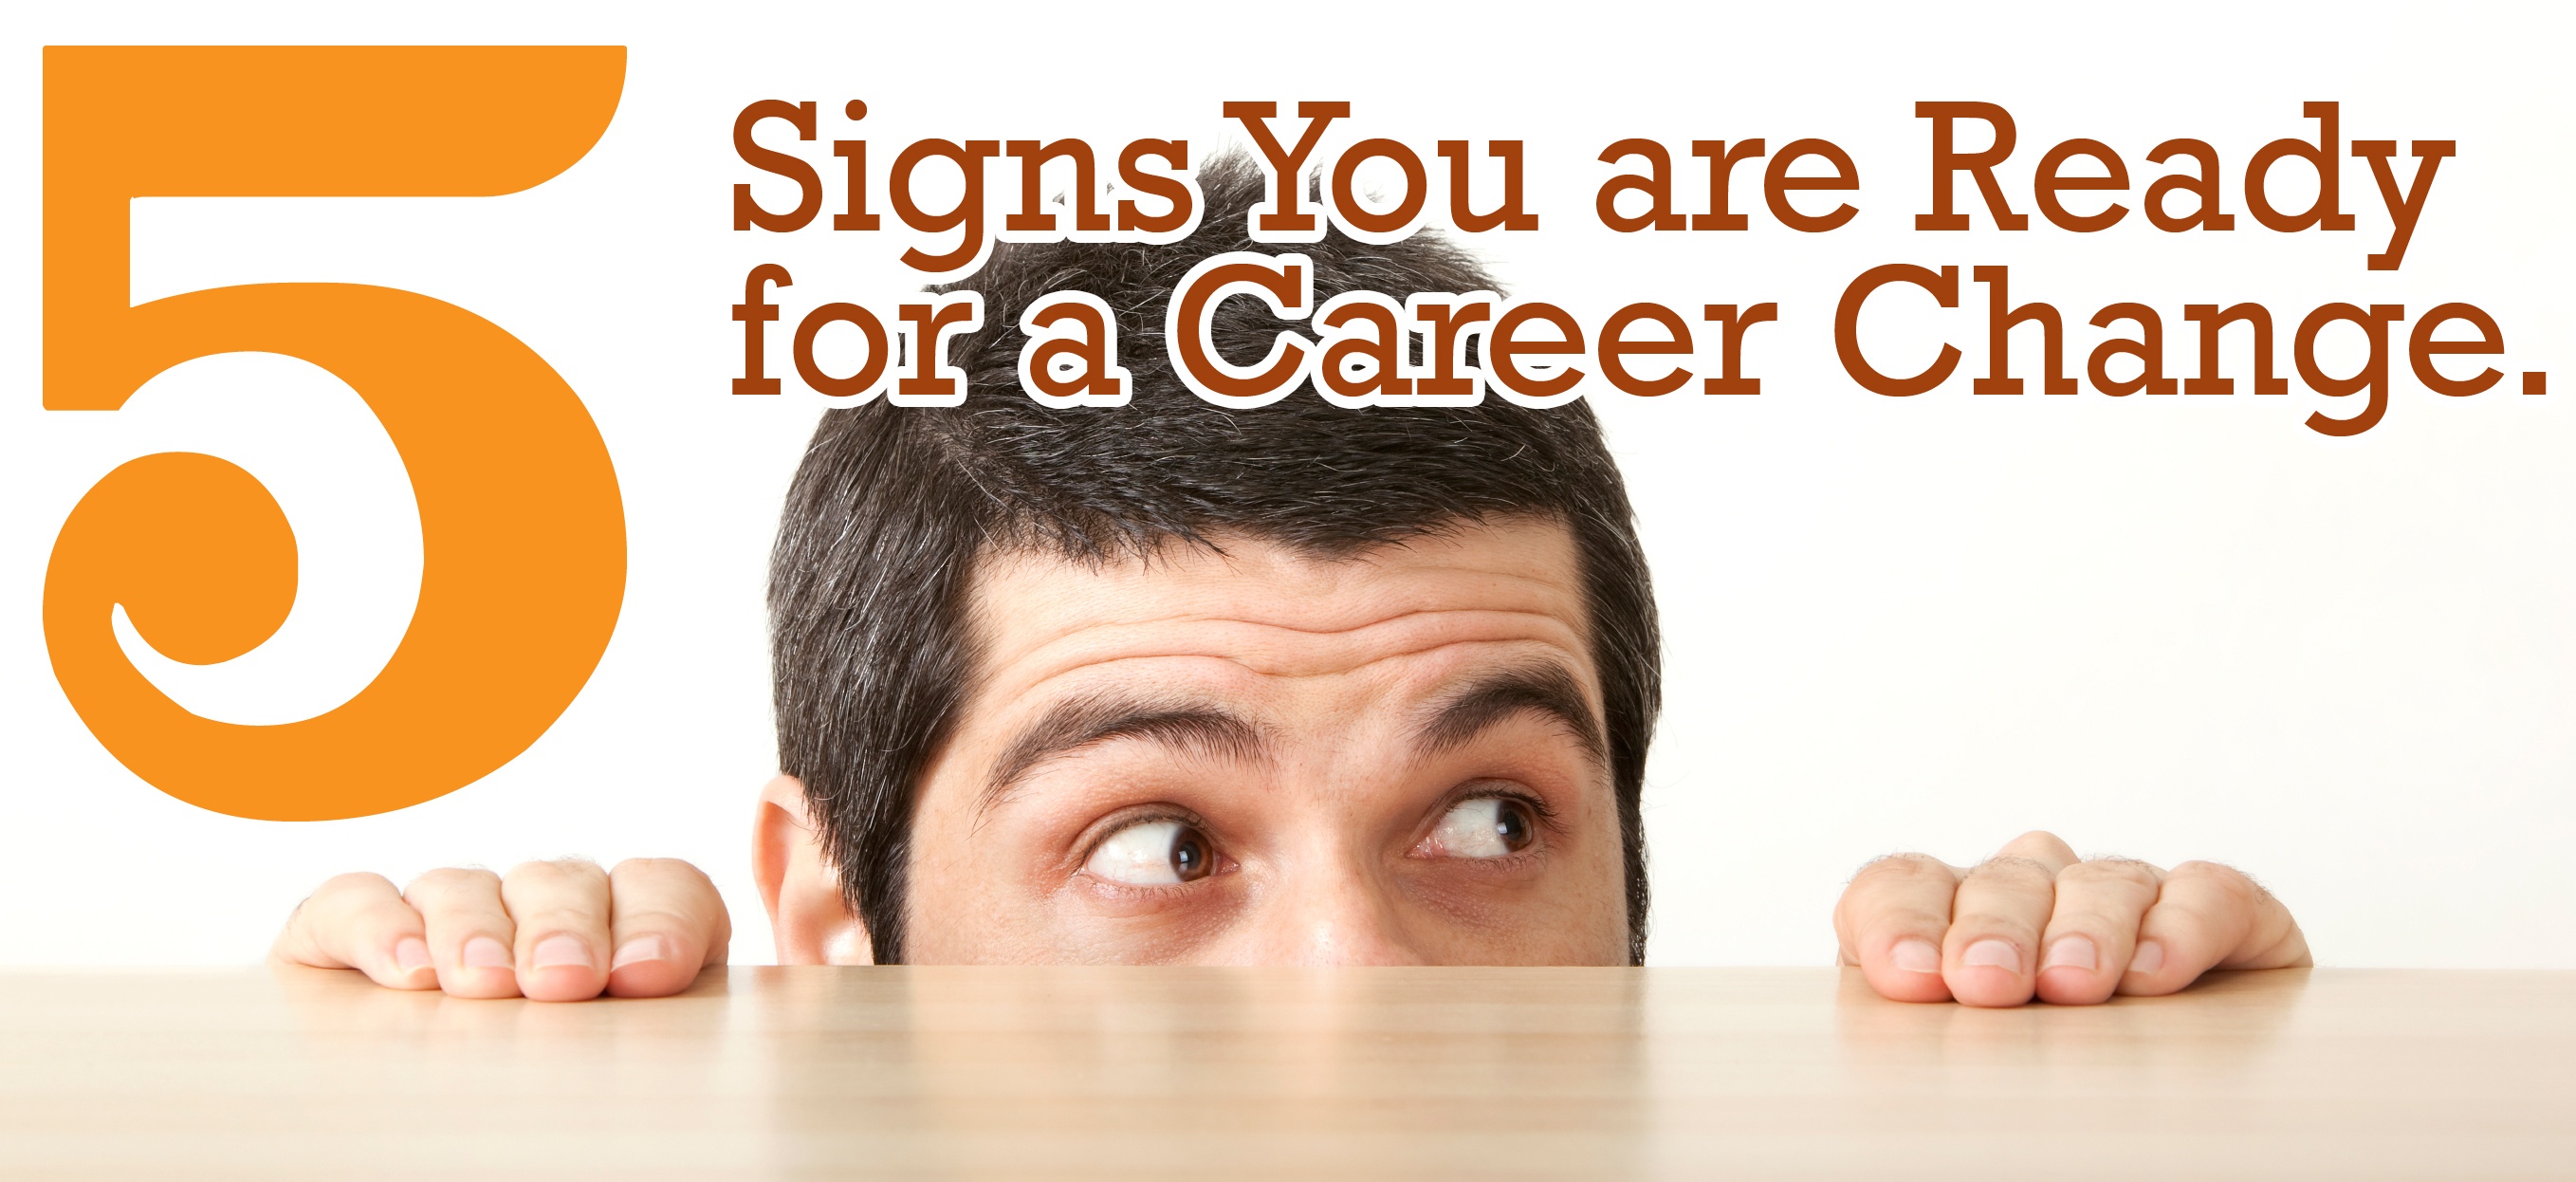 5 Signs You Are Ready for a Career Change